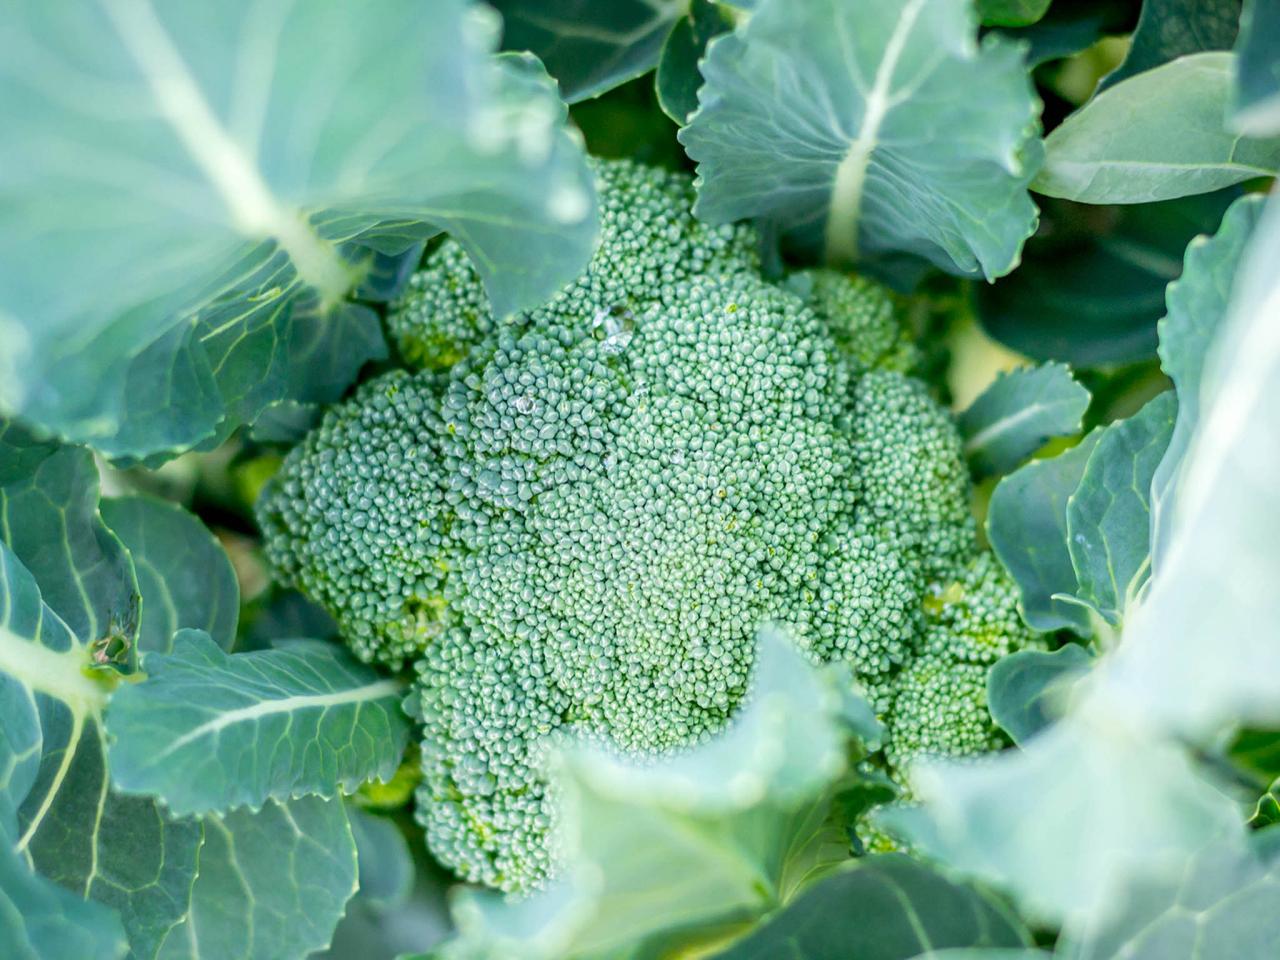 Garden 2019: Get Your Garden Ready with Coles, Broccoli, Cabbage and More!